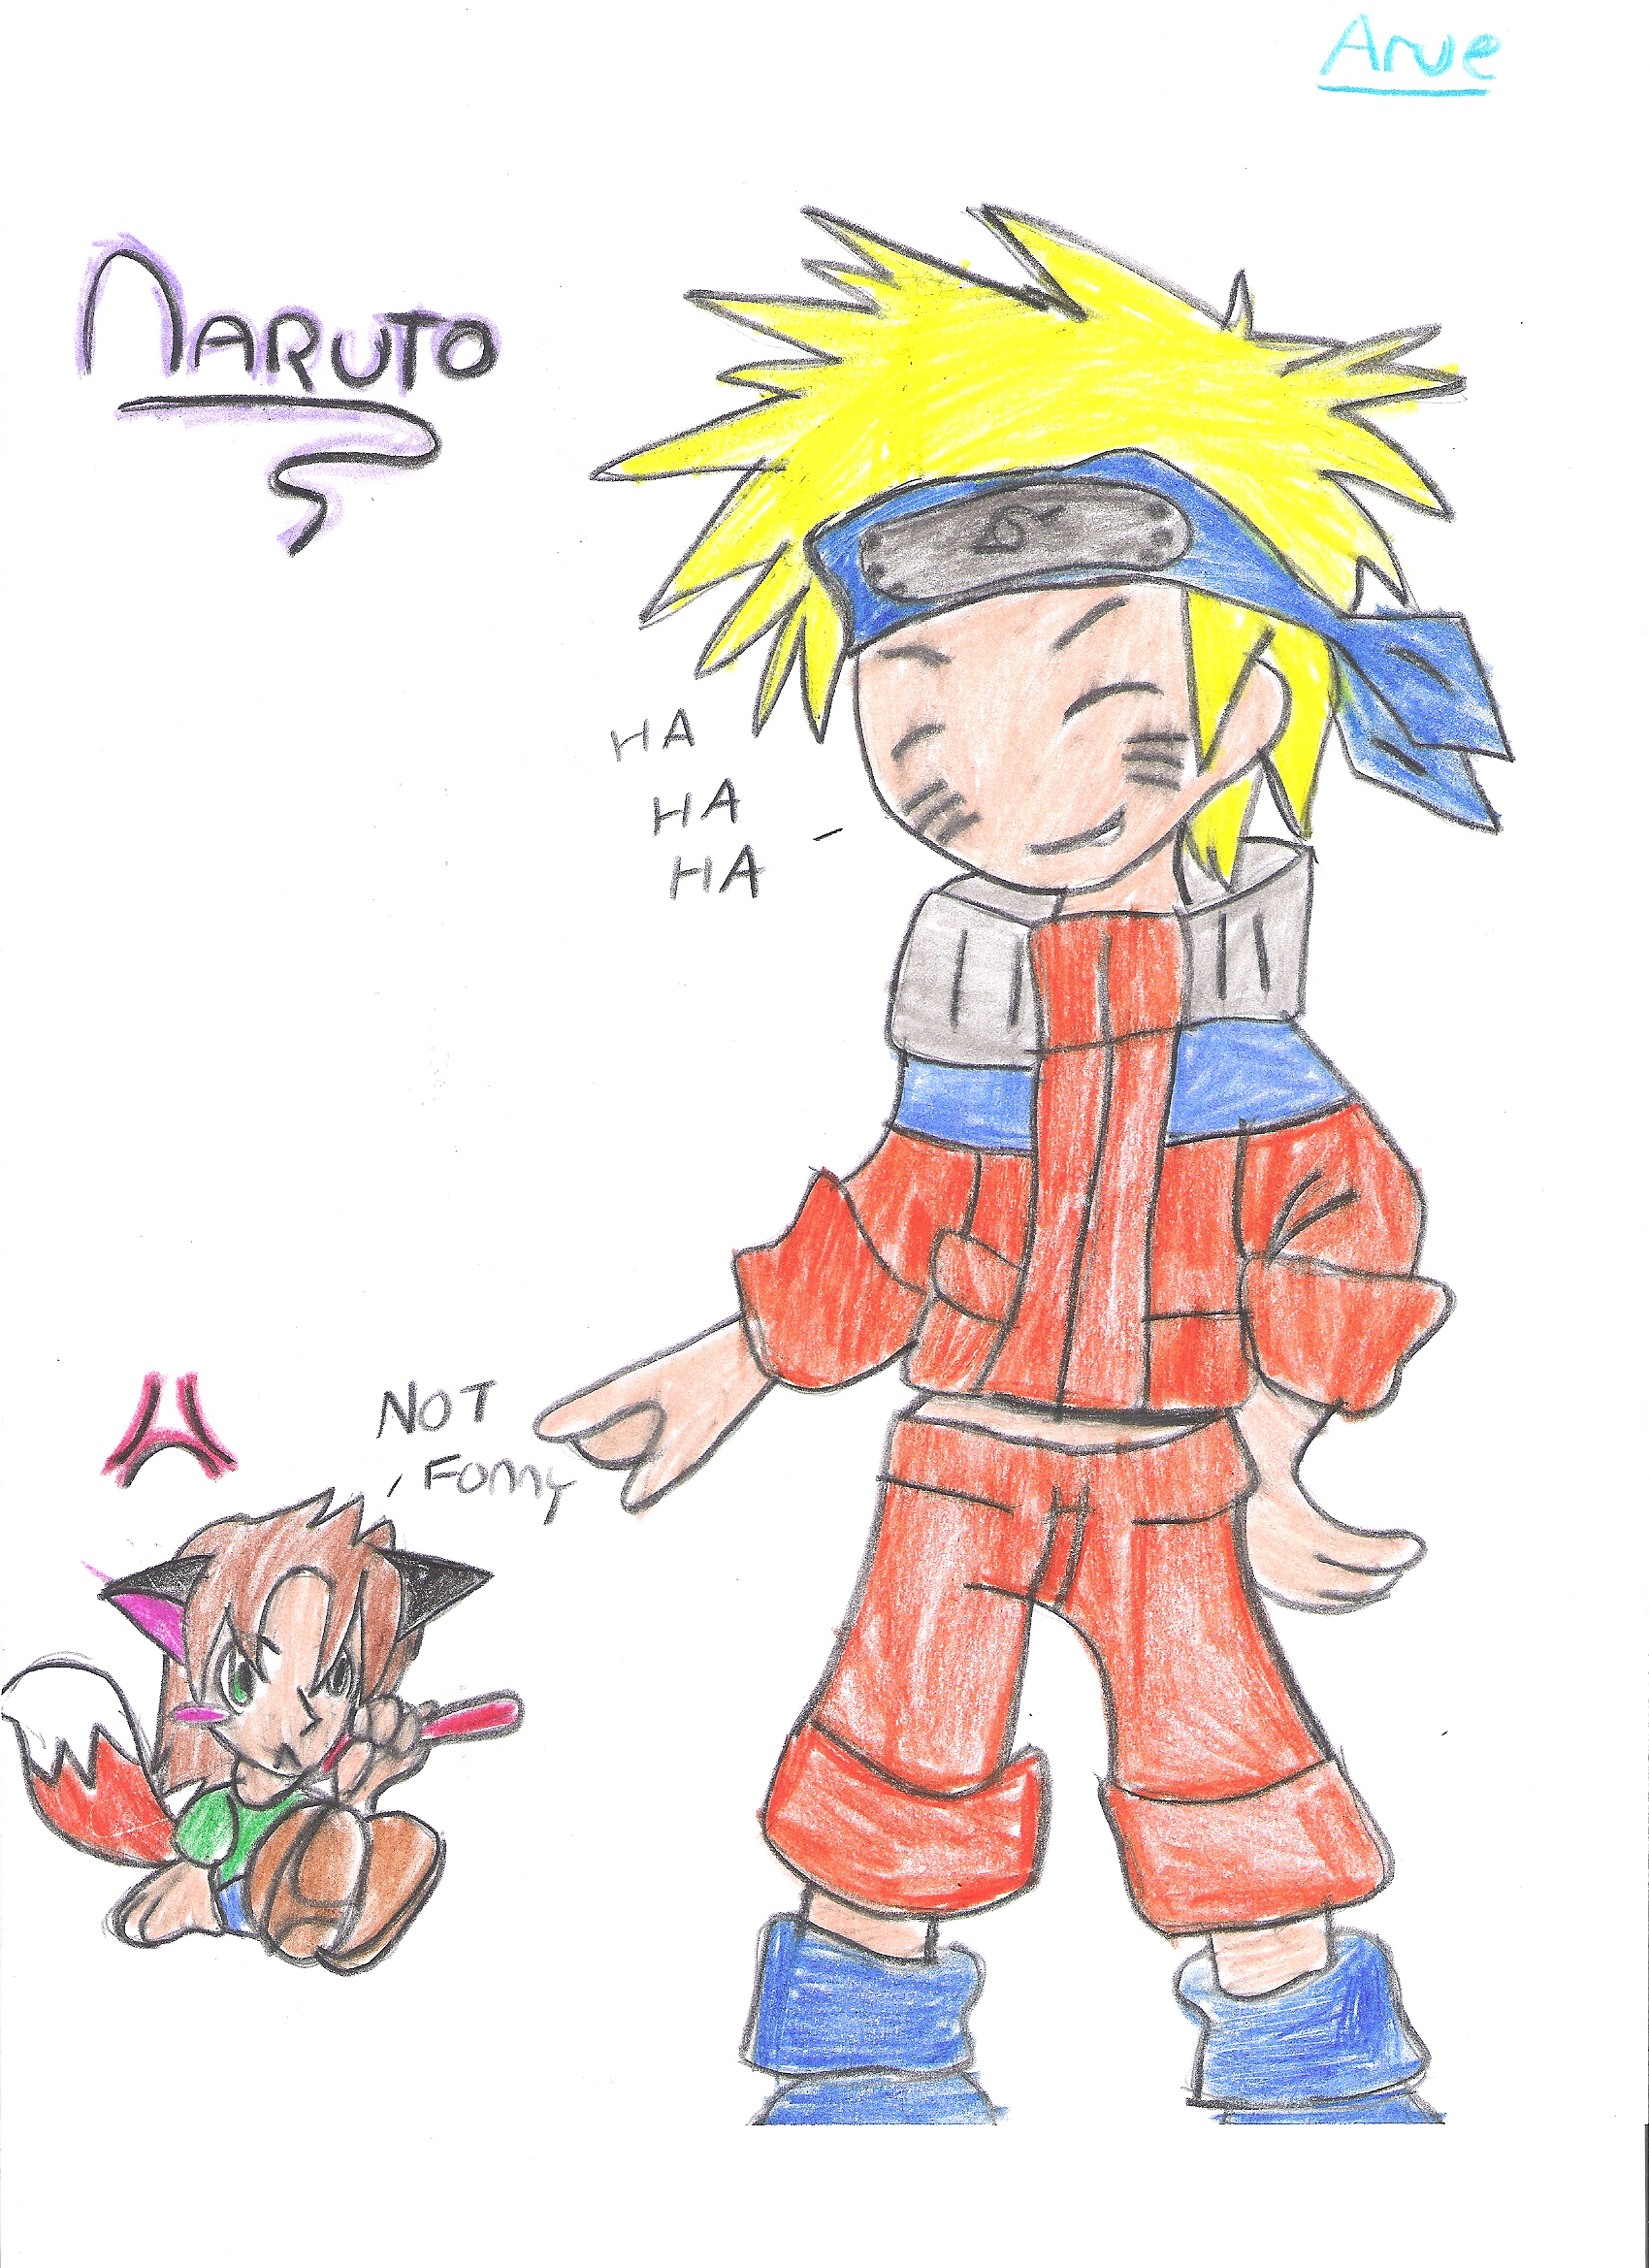 Naruto*for taurus92* by Arue